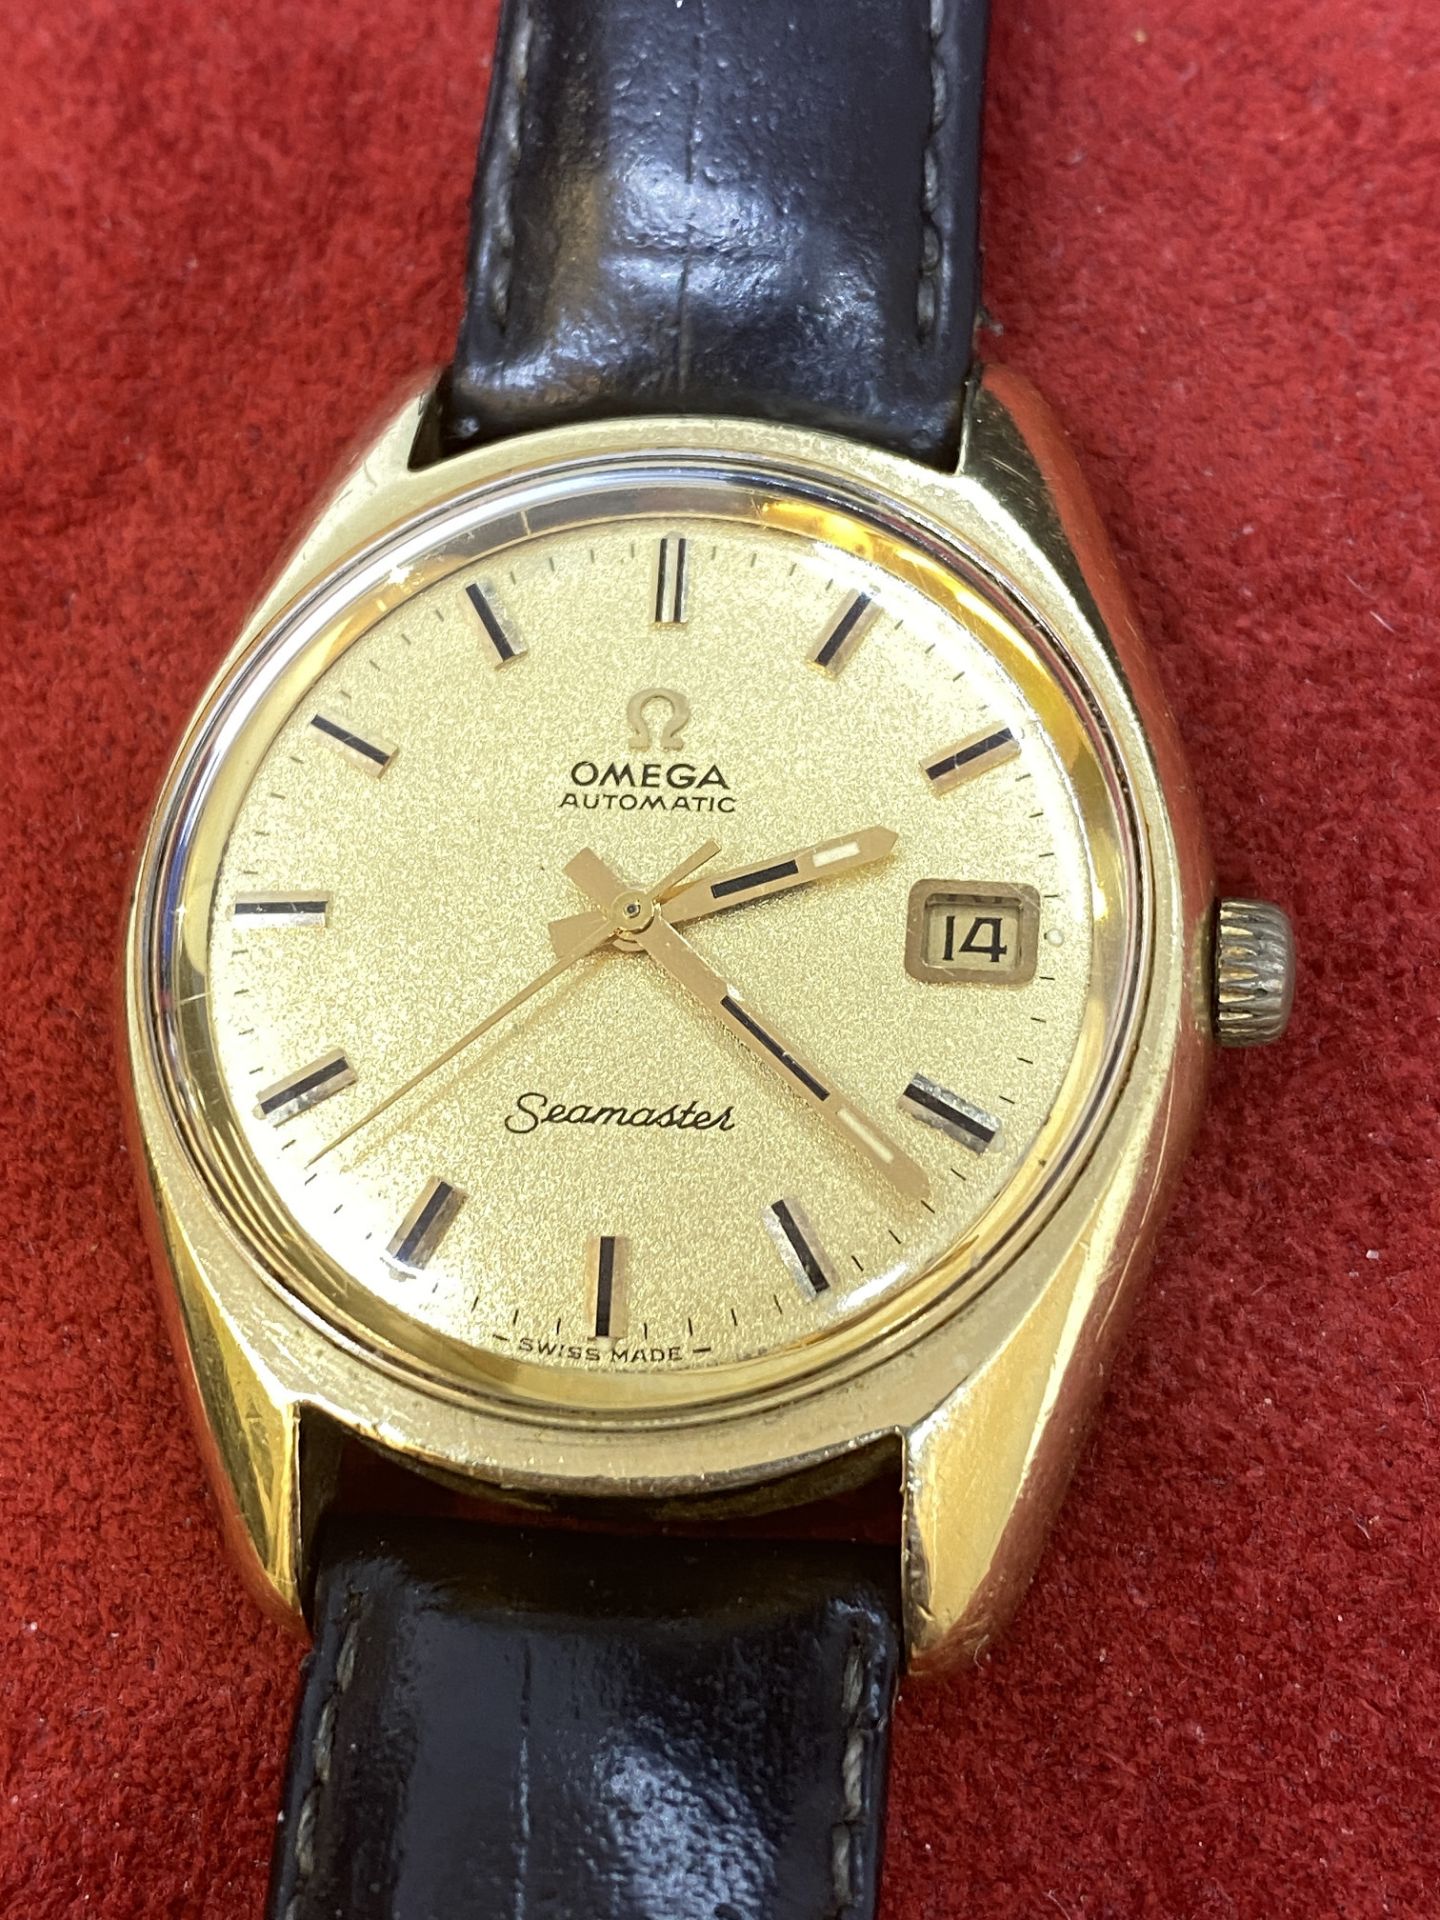 OMEGA STEEL & GOLD SEAMASTER WATCH - Image 4 of 10